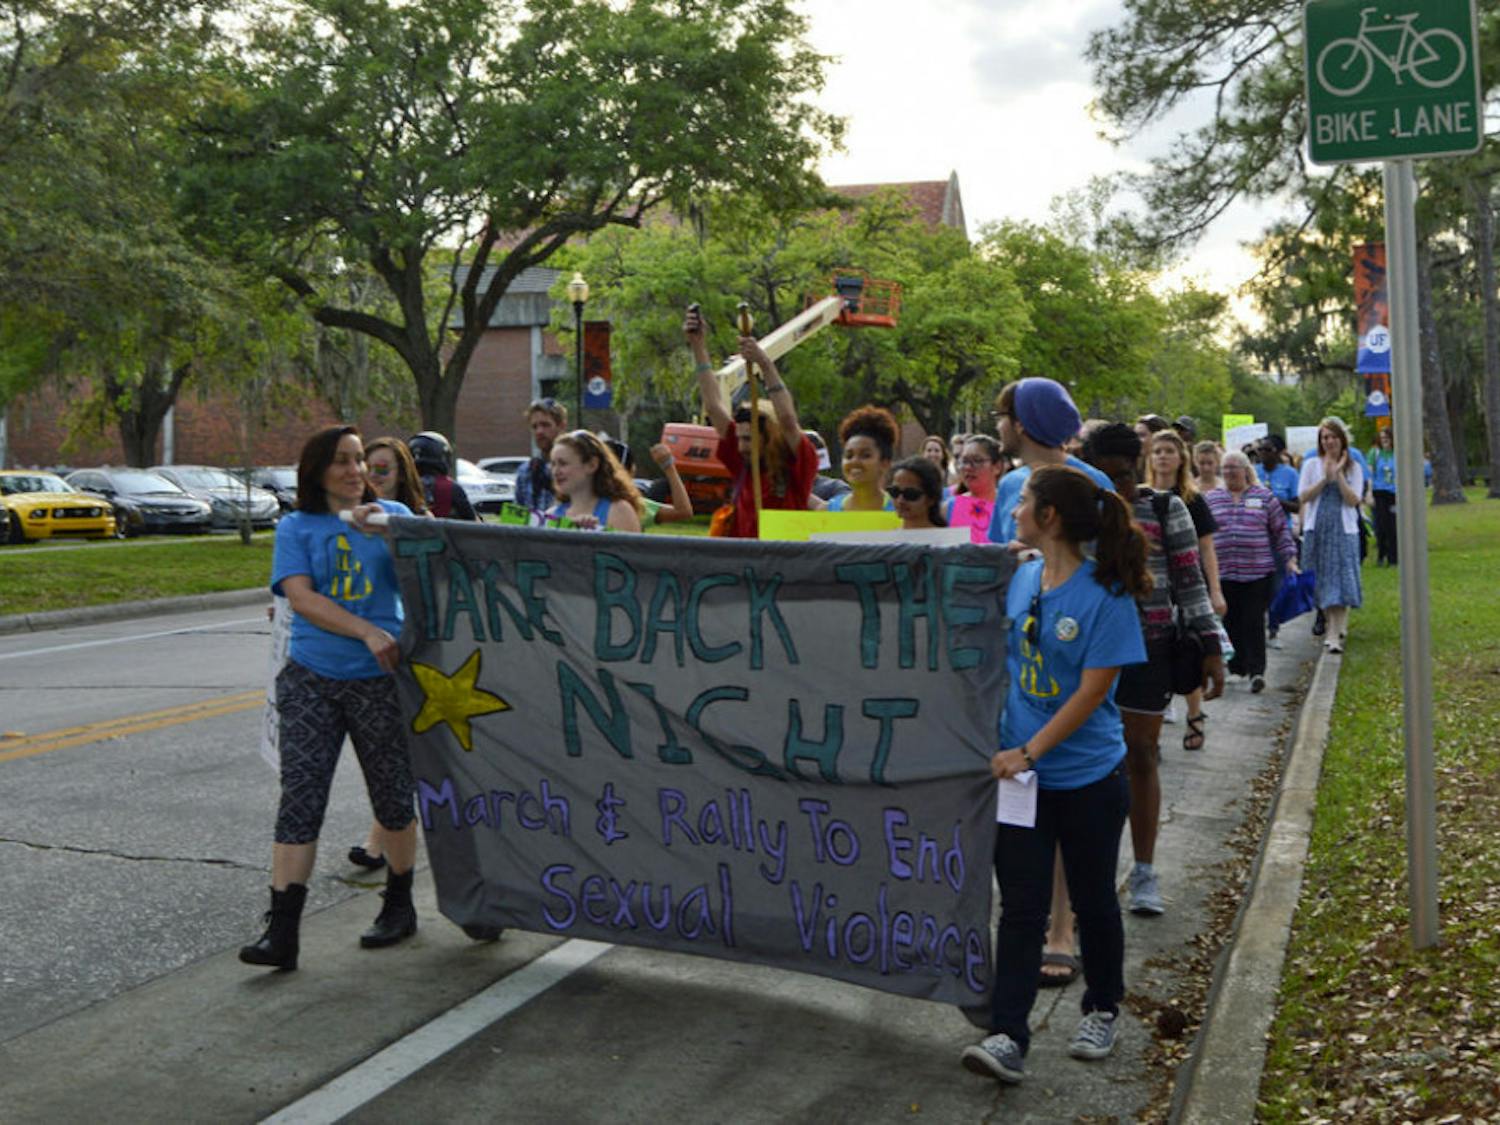 About 300 supporters march through UF campus Wednesday evening as part of the annual Take Back the Night event to raise awareness about sexual assault.